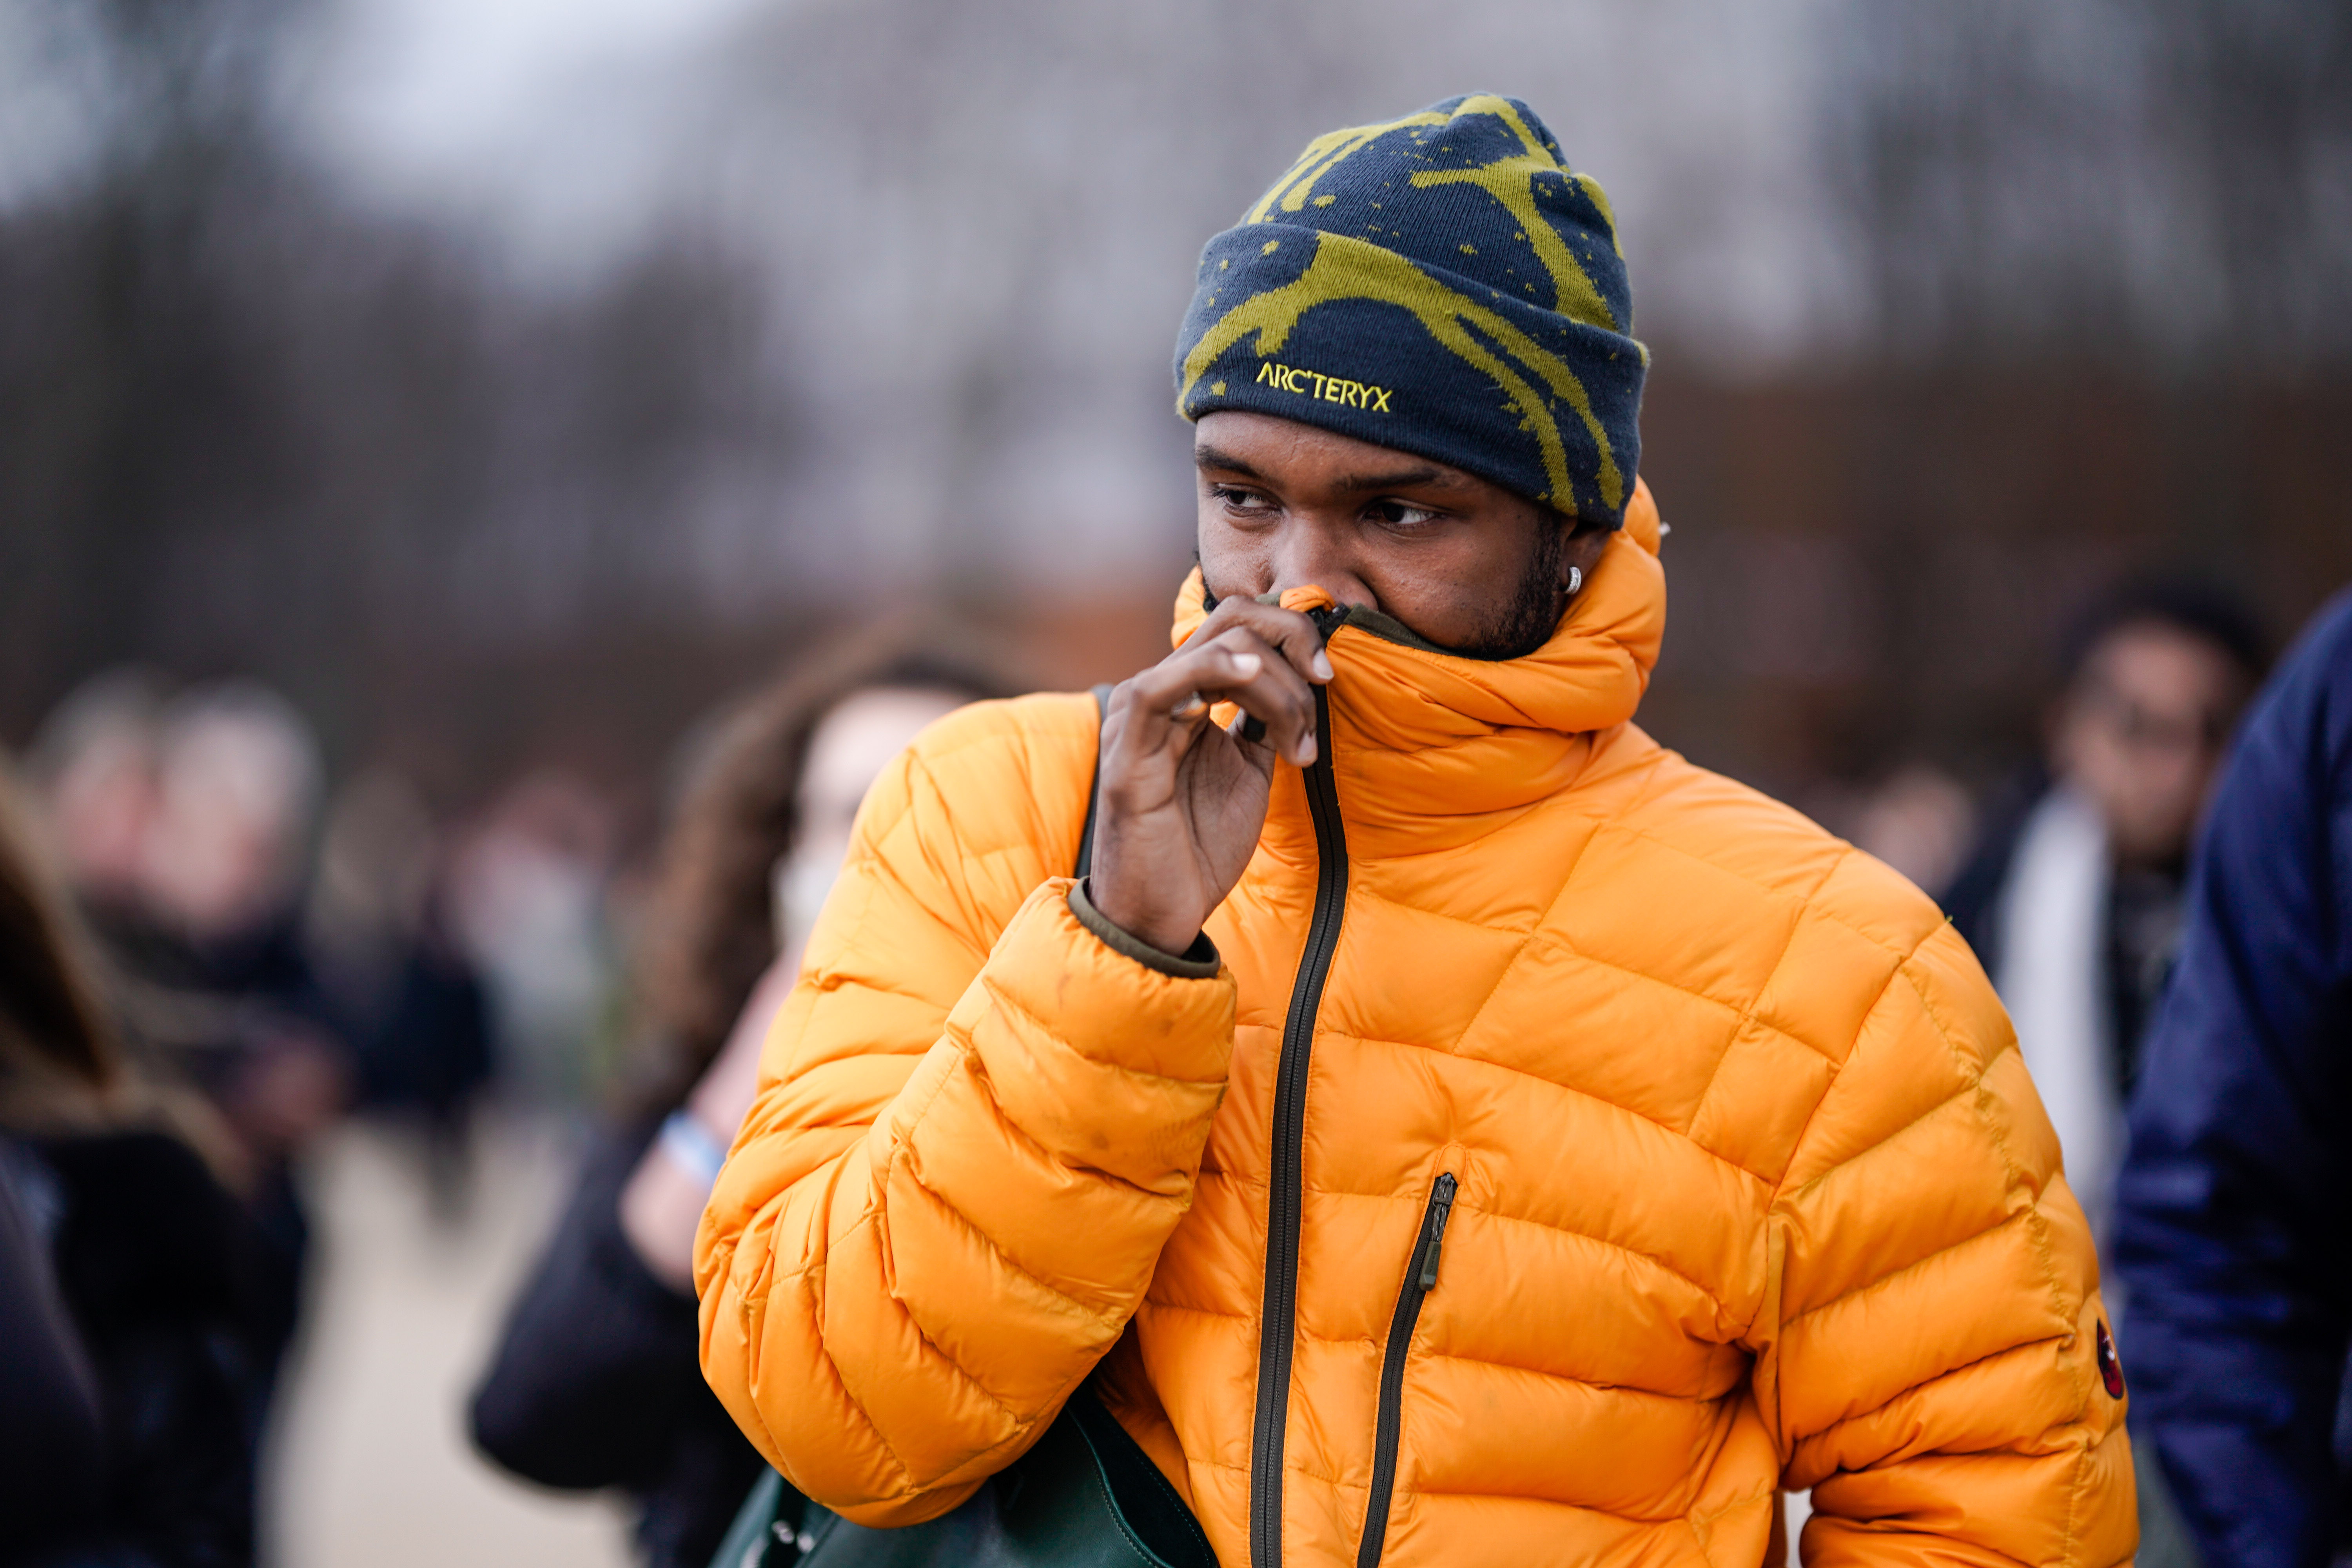 Frank Ocean pictured wearing an orange puffer jacket, a beanie hat during Paris Fashion Week - Menswear F/W 2019-2020, on January 17, 2019 in Paris, France  | Source: Getty Images